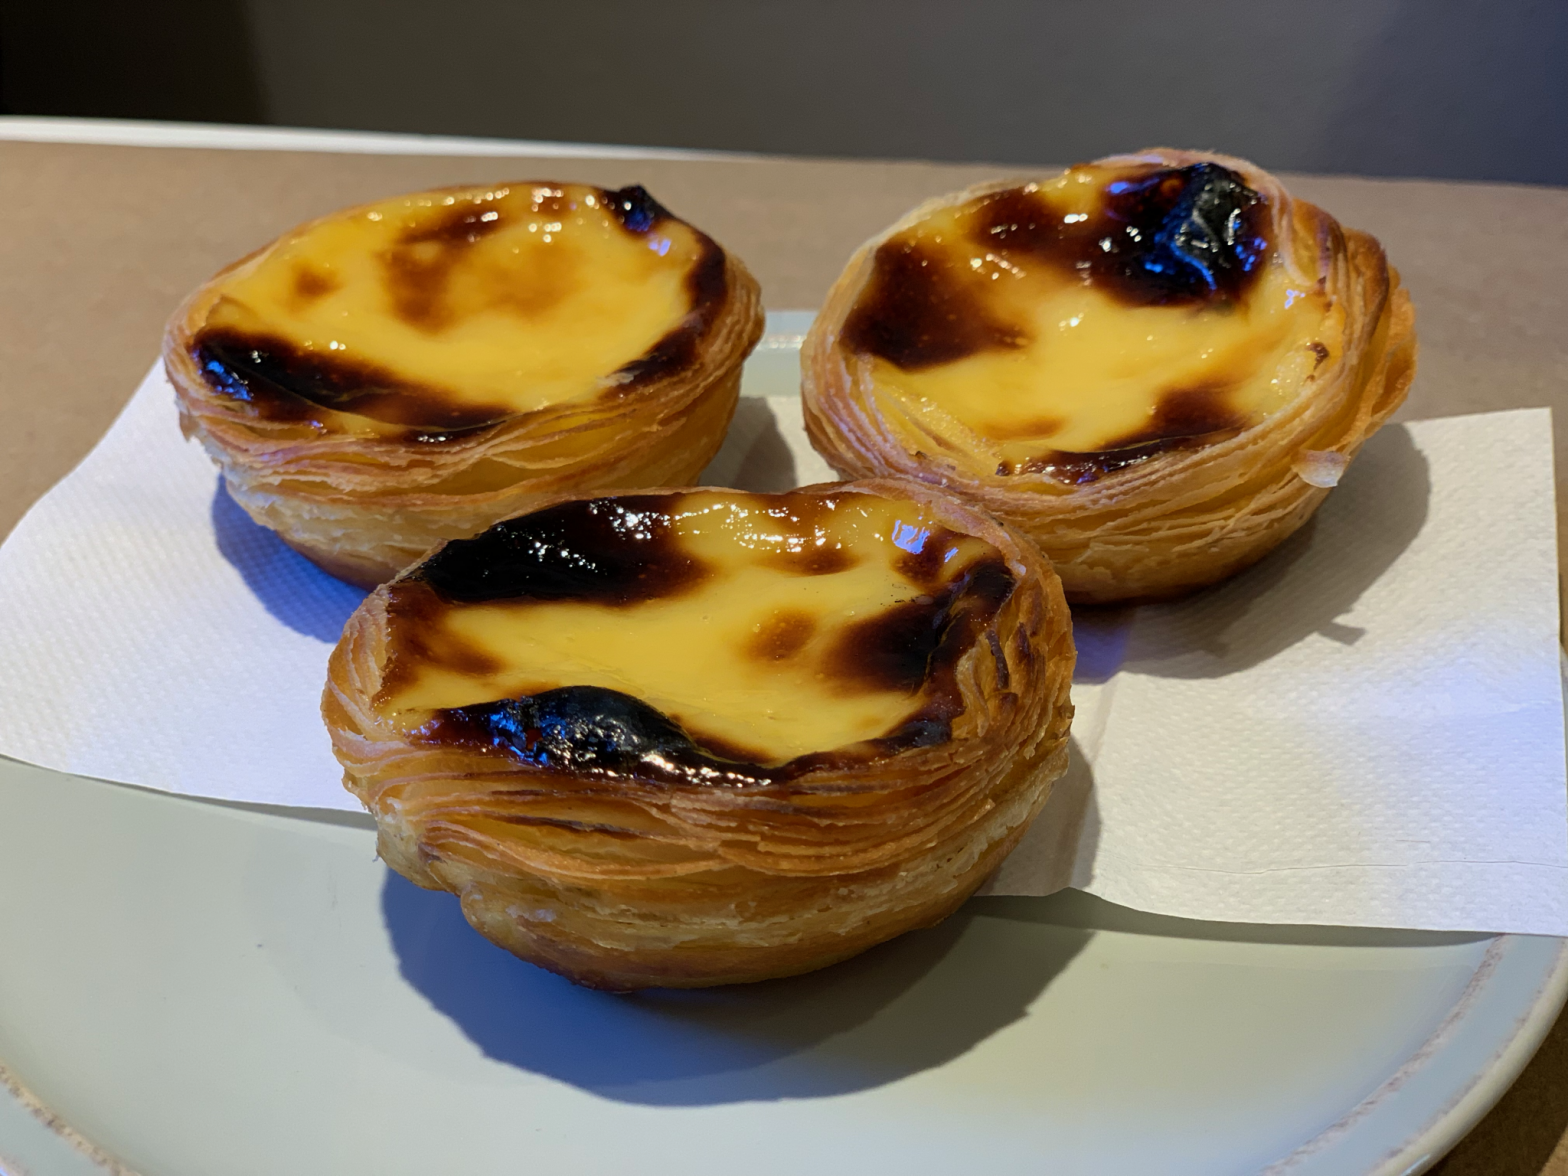 VIP return to Lisbon – a story of blood, pastries and Kombucha